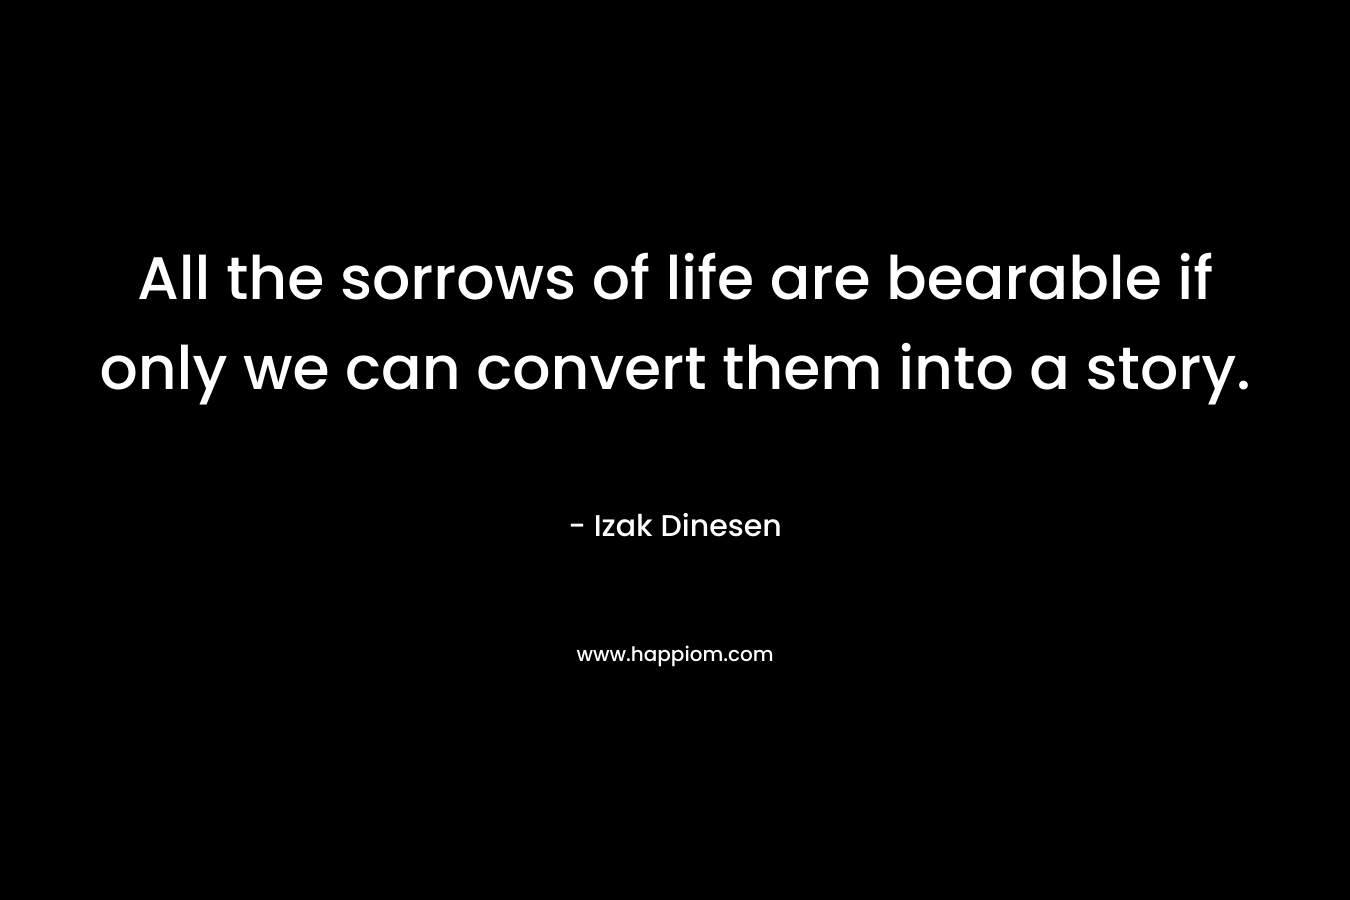 All the sorrows of life are bearable if only we can convert them into a story.